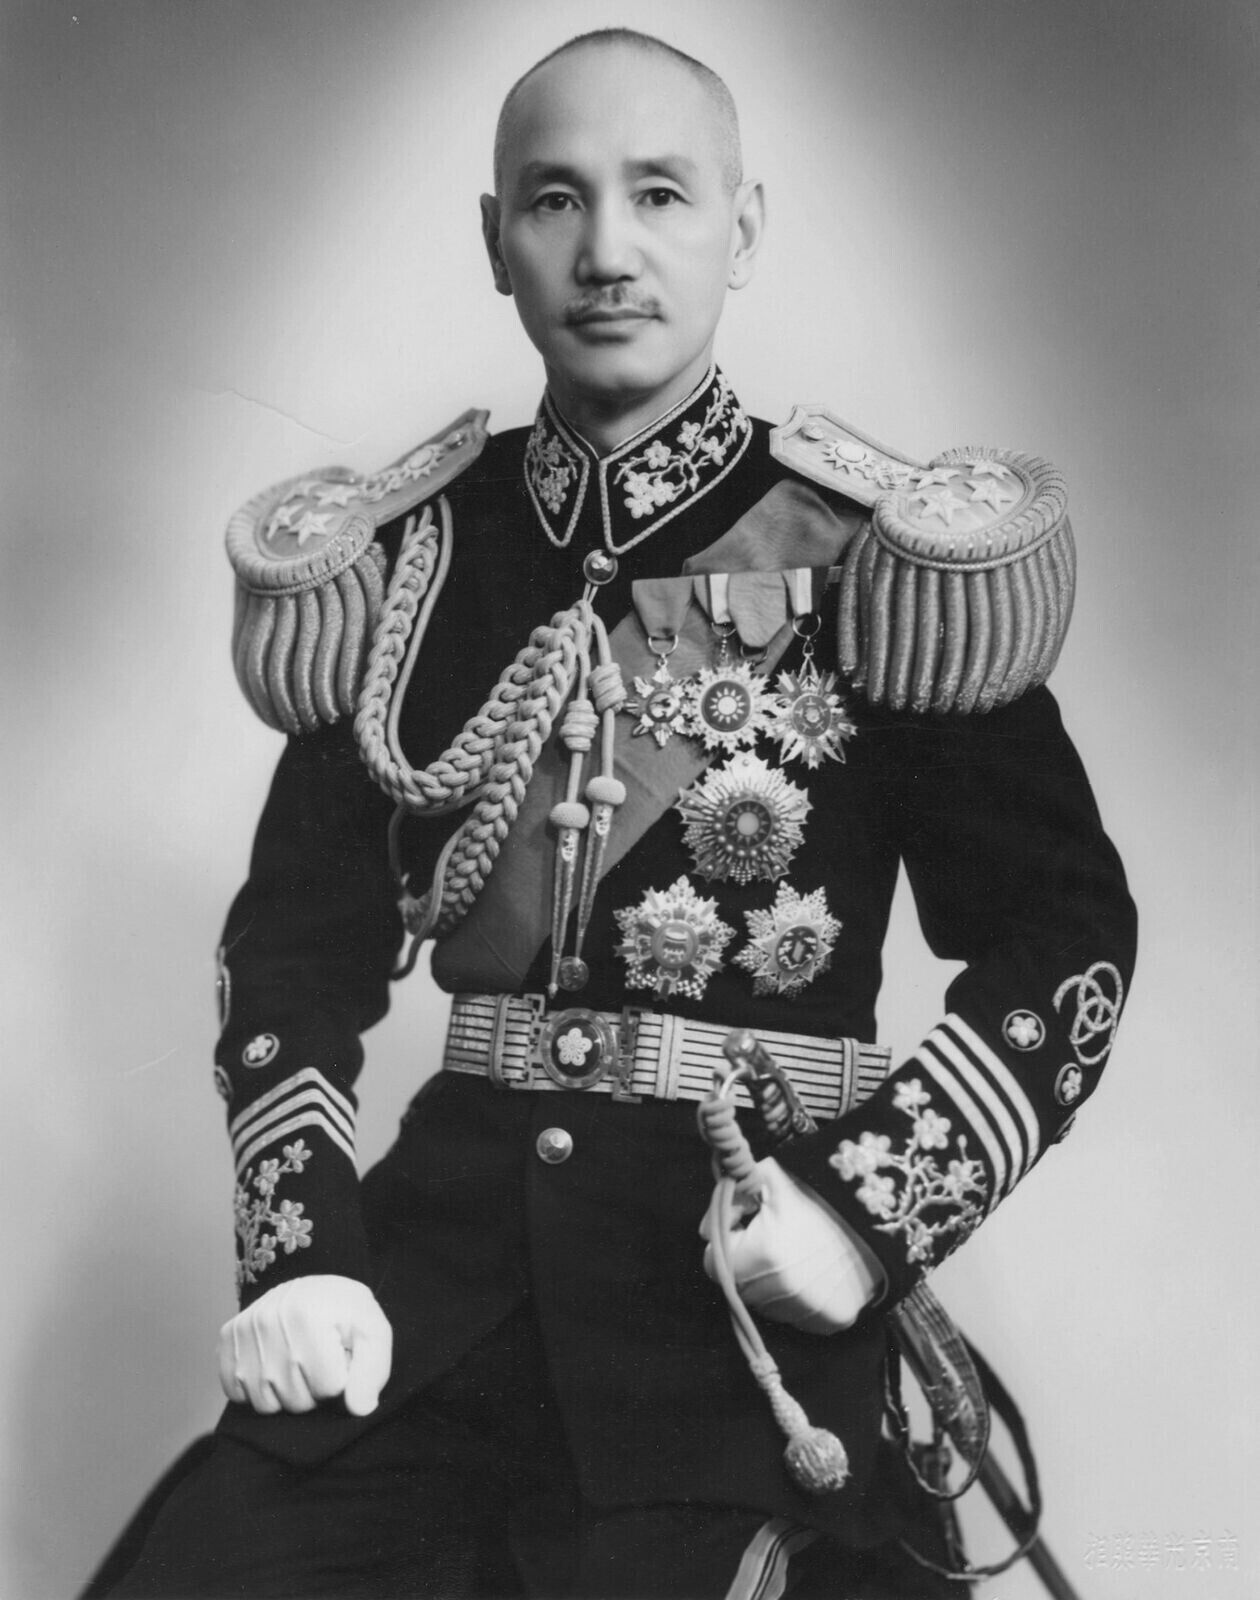 1940 CHINESE LEADER Chiang Kai-shek Historic Picture Photo 4x6